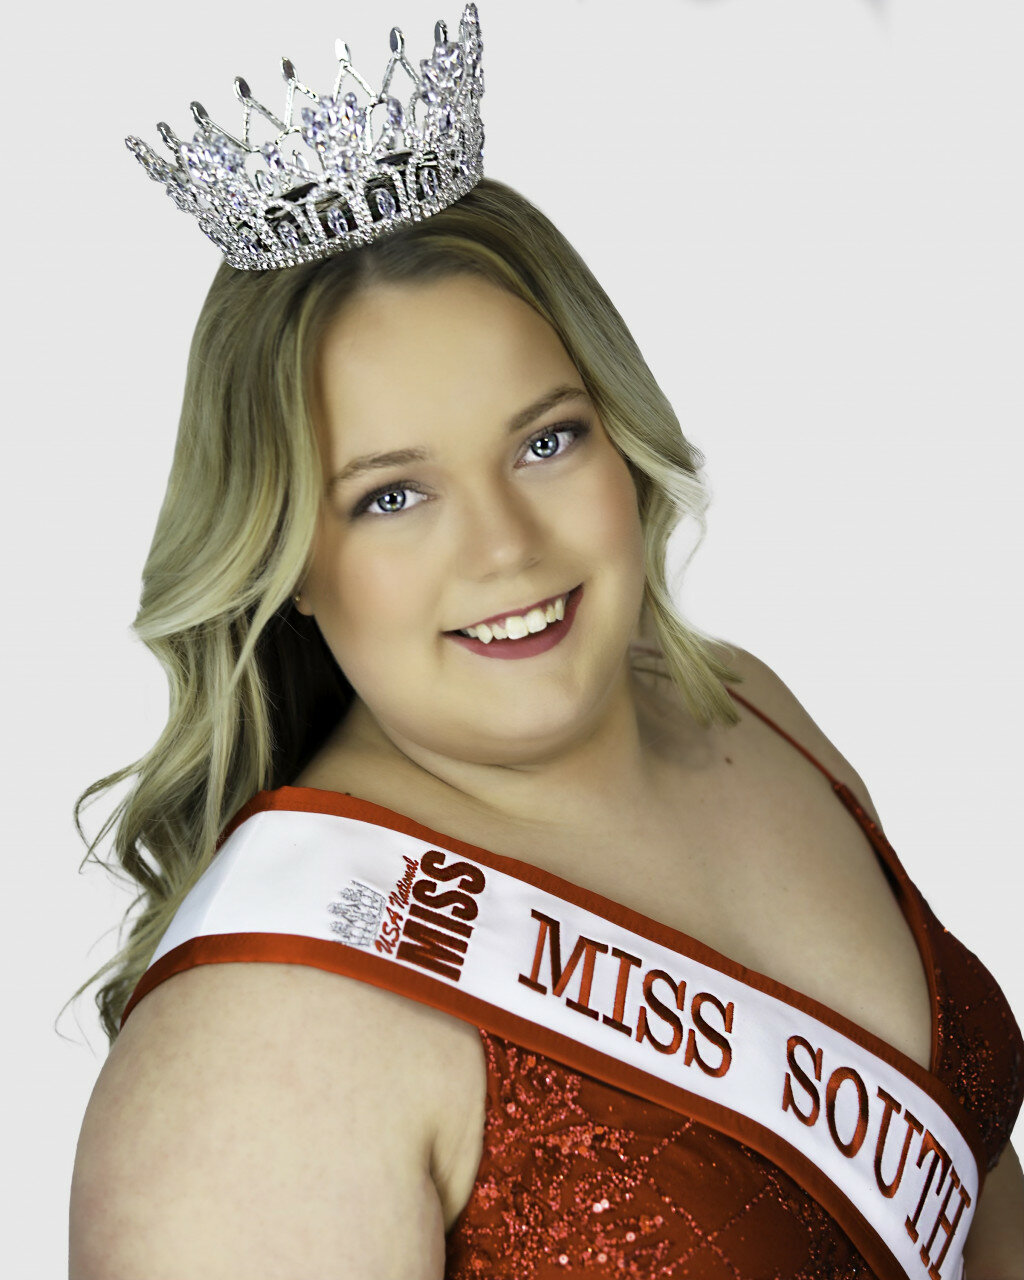 courtesy photo
Jaycee Clark of Huron is shown wearing the sash and crown she received for competition in the USA National Miss pageant planned in July. She is the first from South Dakota to be represented in the pageant.